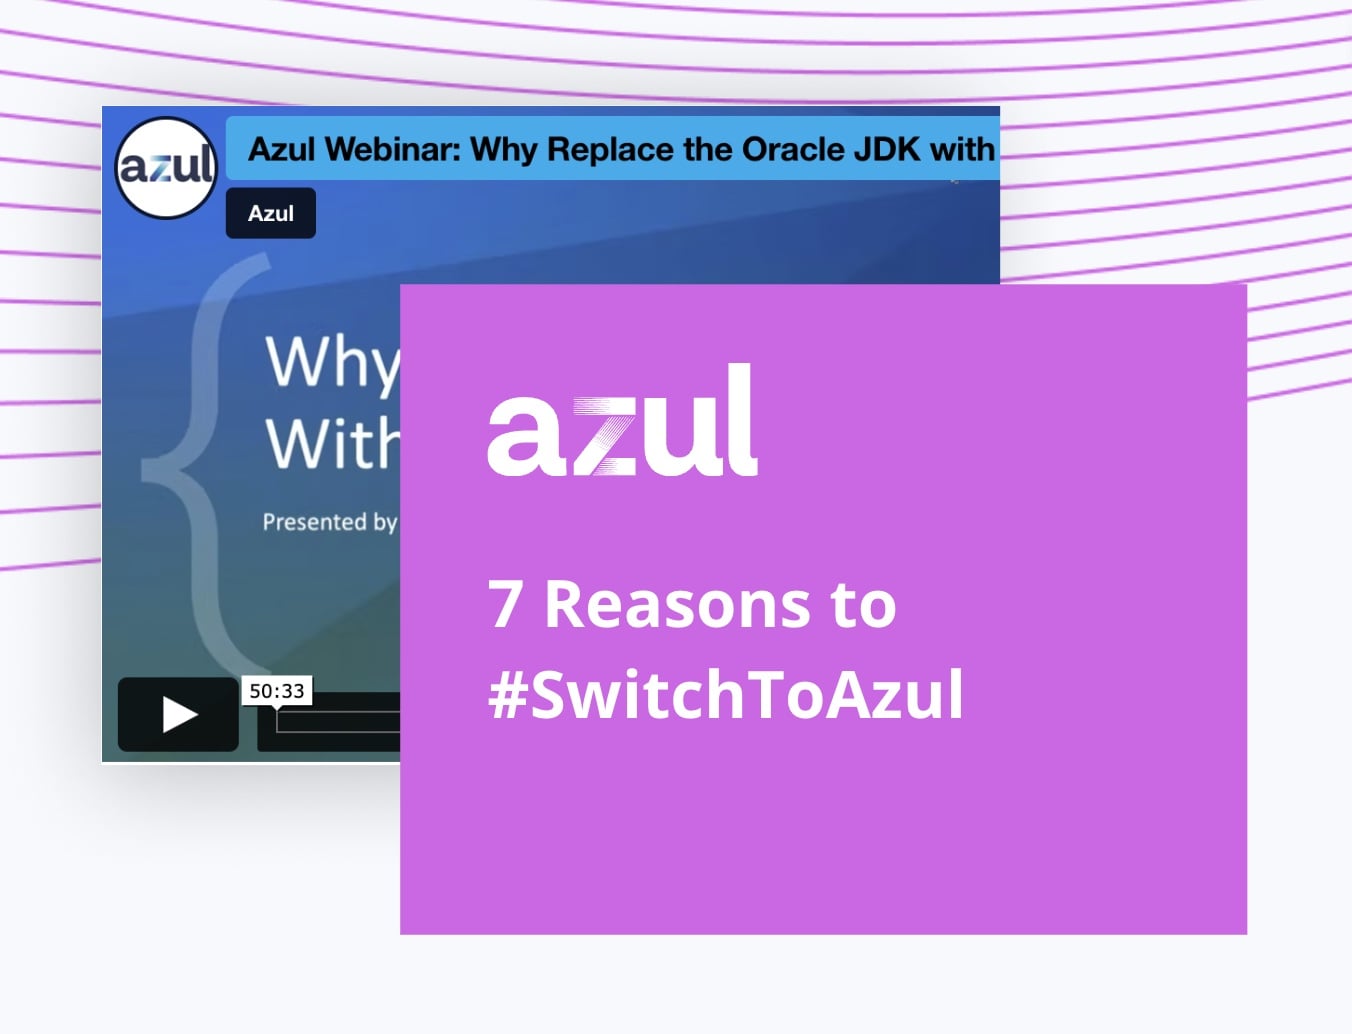 7 Reasons to #SwitchToAzul